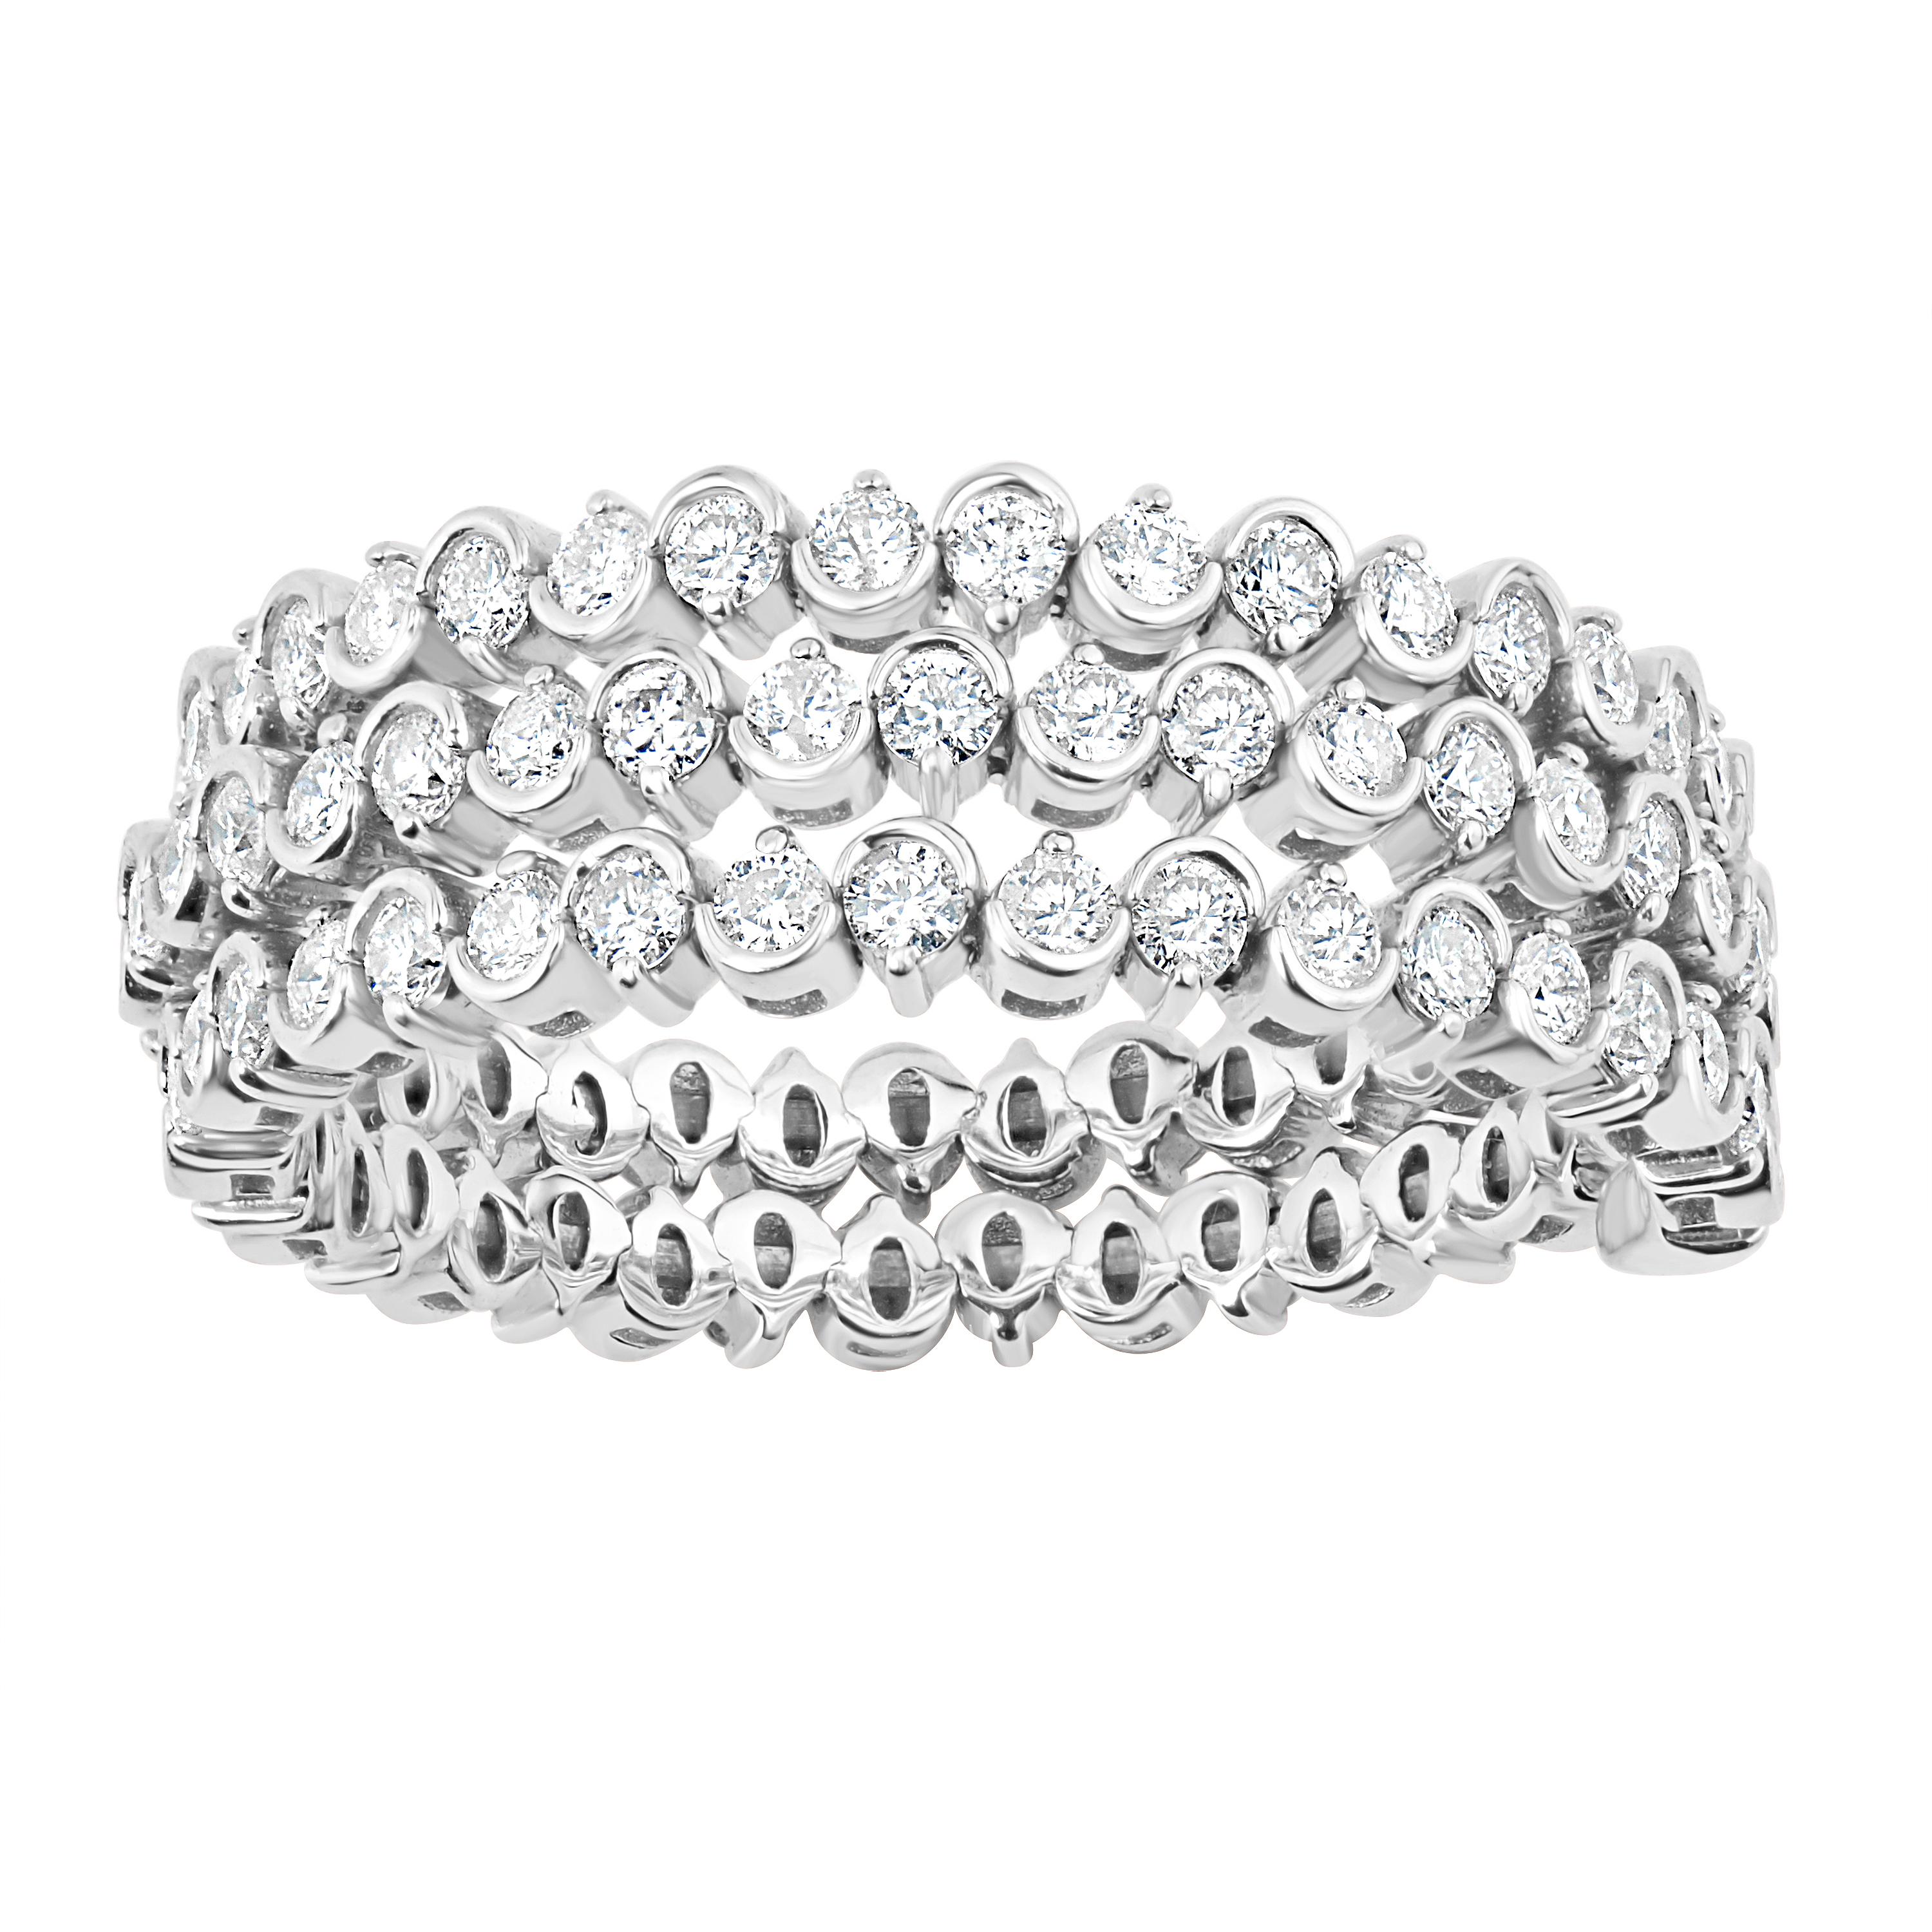 This Luxle charming round diamond ring is set in 18K White Gold studded with round full-cut sparkling white diamonds. The diamonds are I1 in clarity. The total weight of these diamonds in the stackable ring is 1.40 cwt. Keep it simple, elegant, and